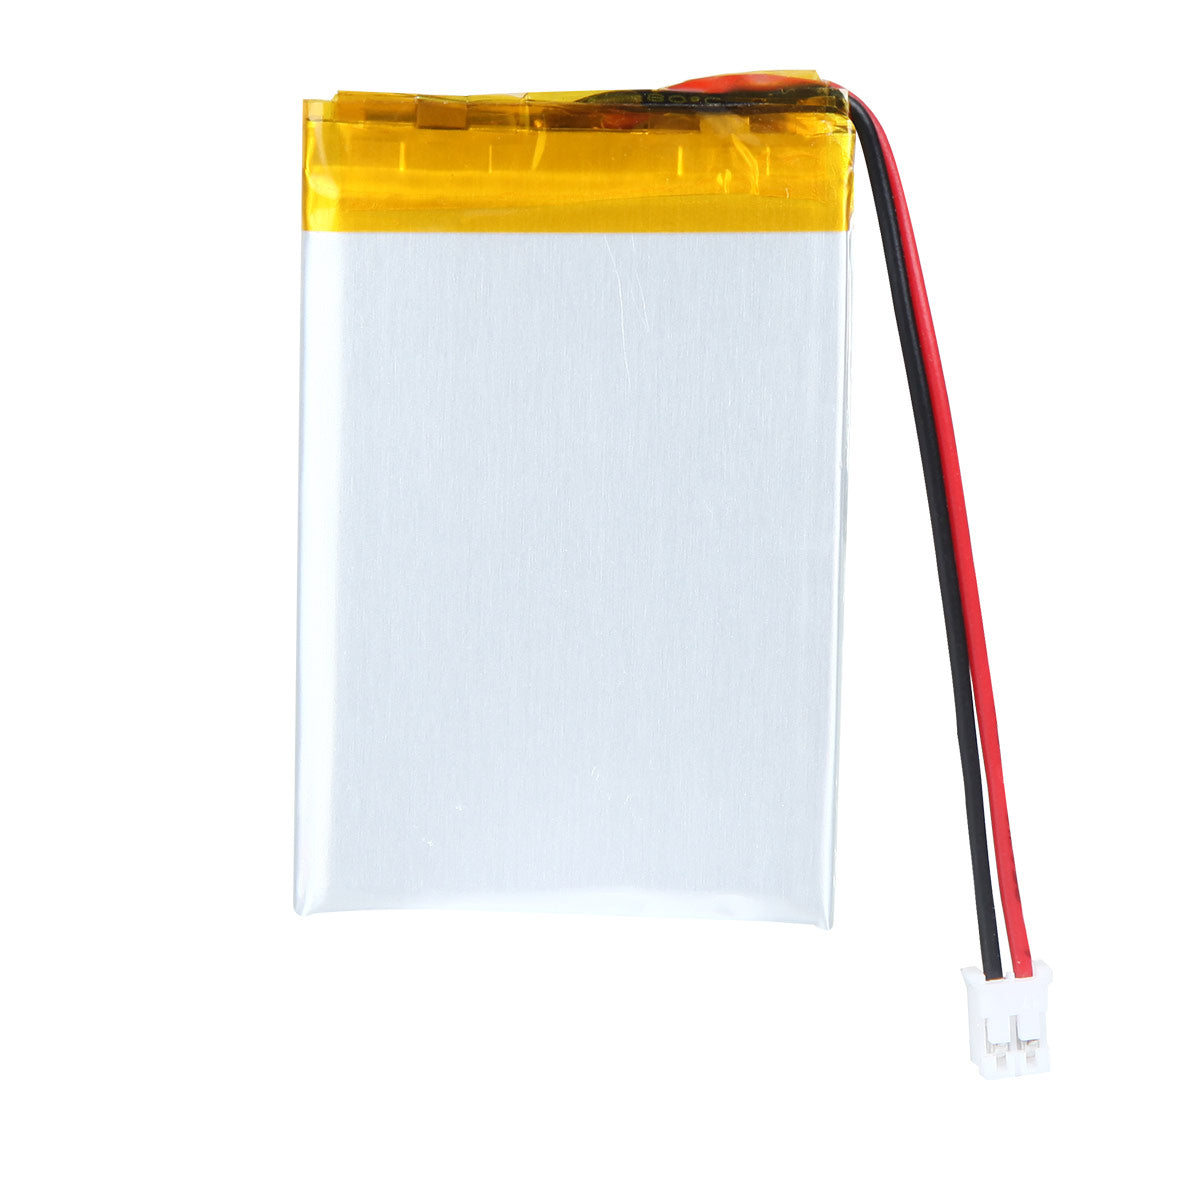 3.7V 500mAh 303450 Rechargeable Lithium Polymer Battery Length 52mm